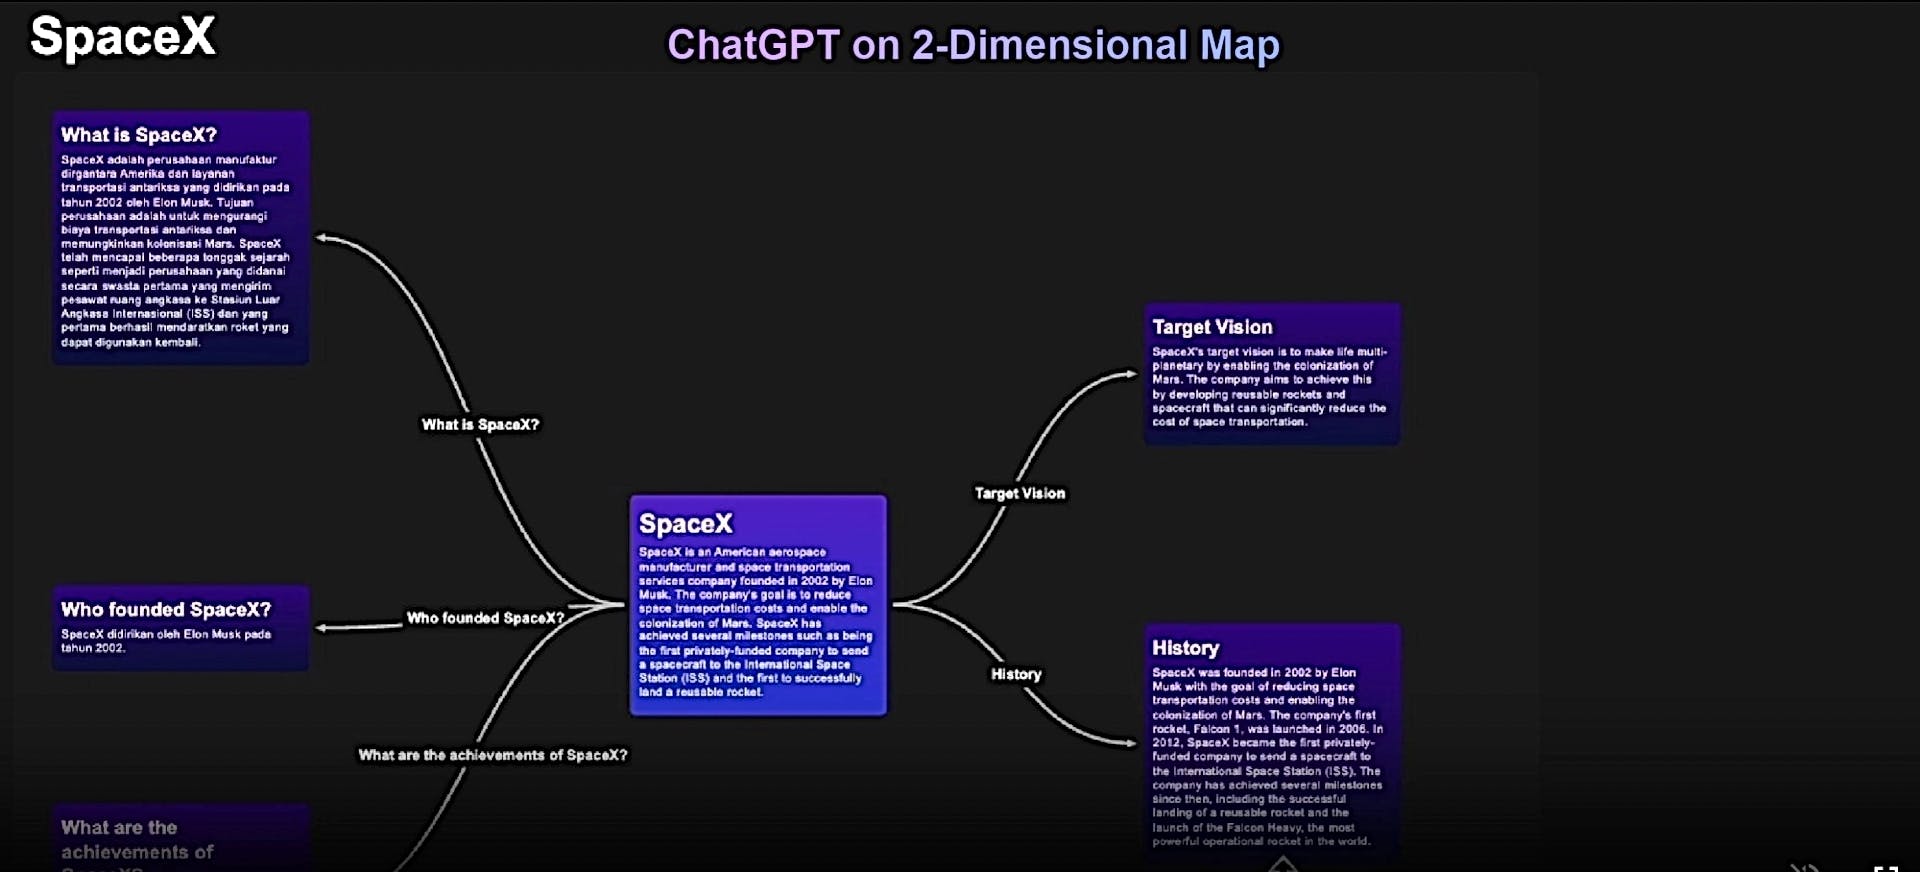 ChatGPT-2D featured